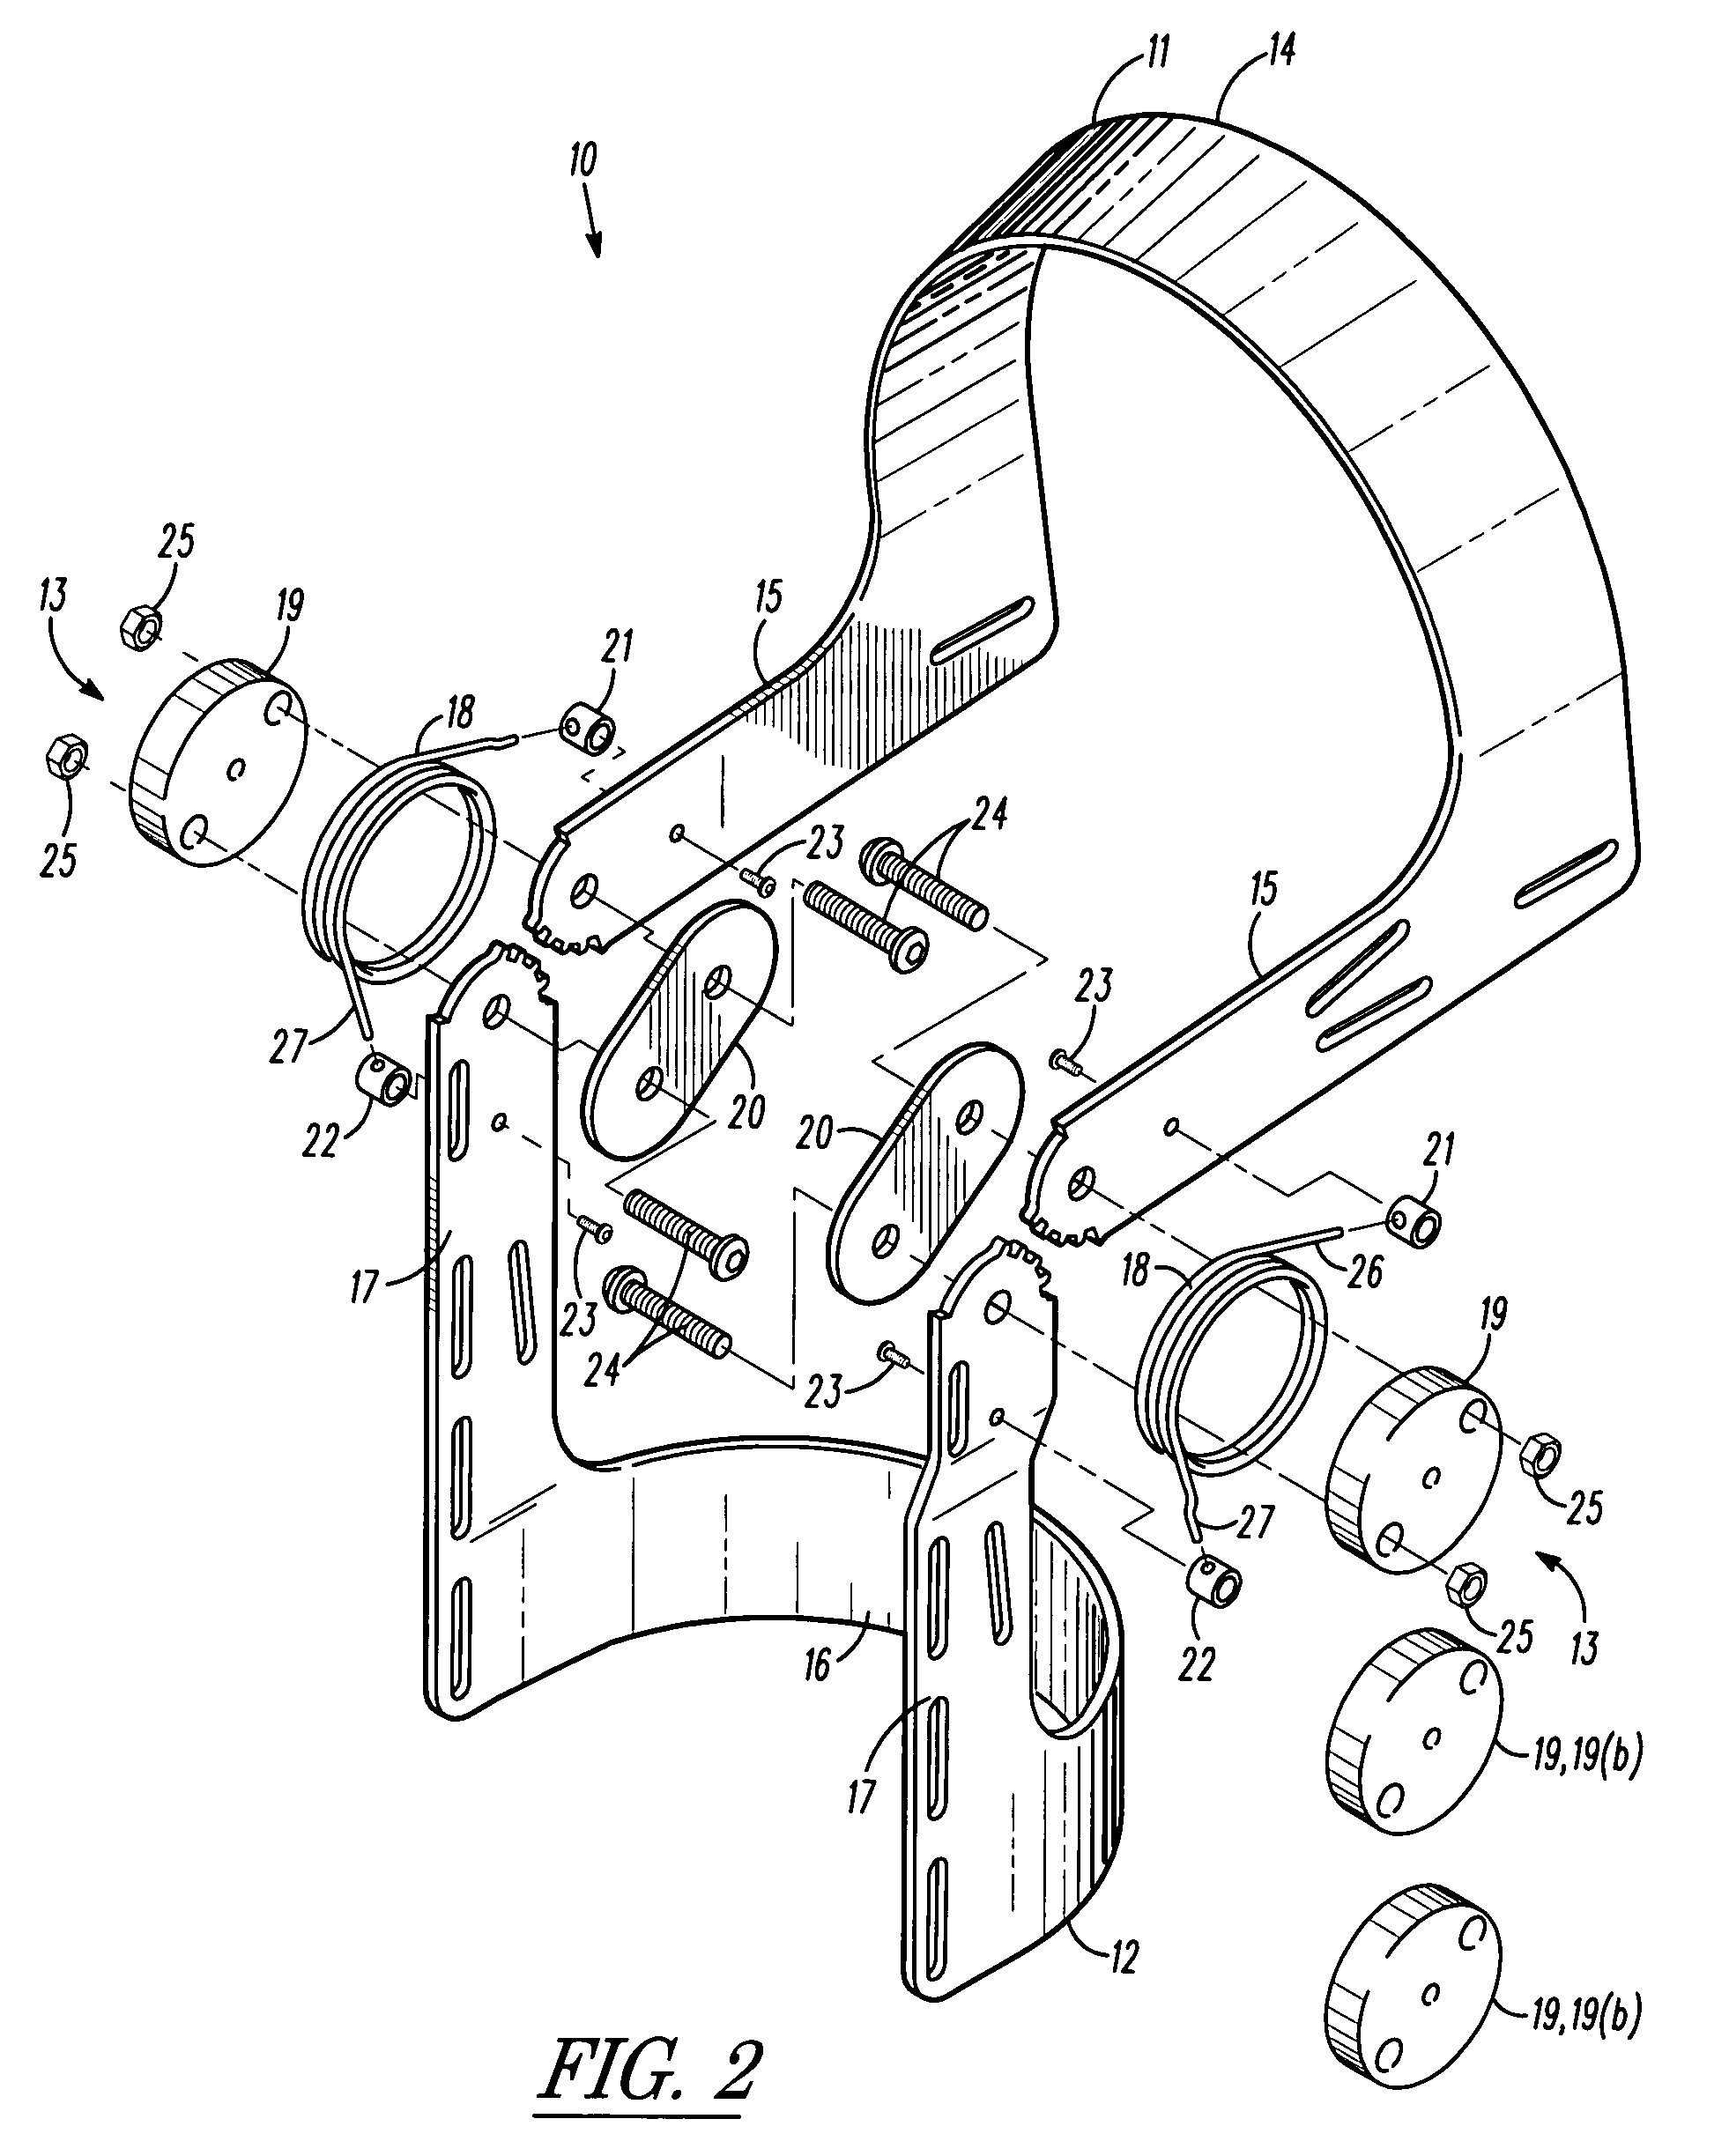 Method, apparatus, and system for bracing a knee